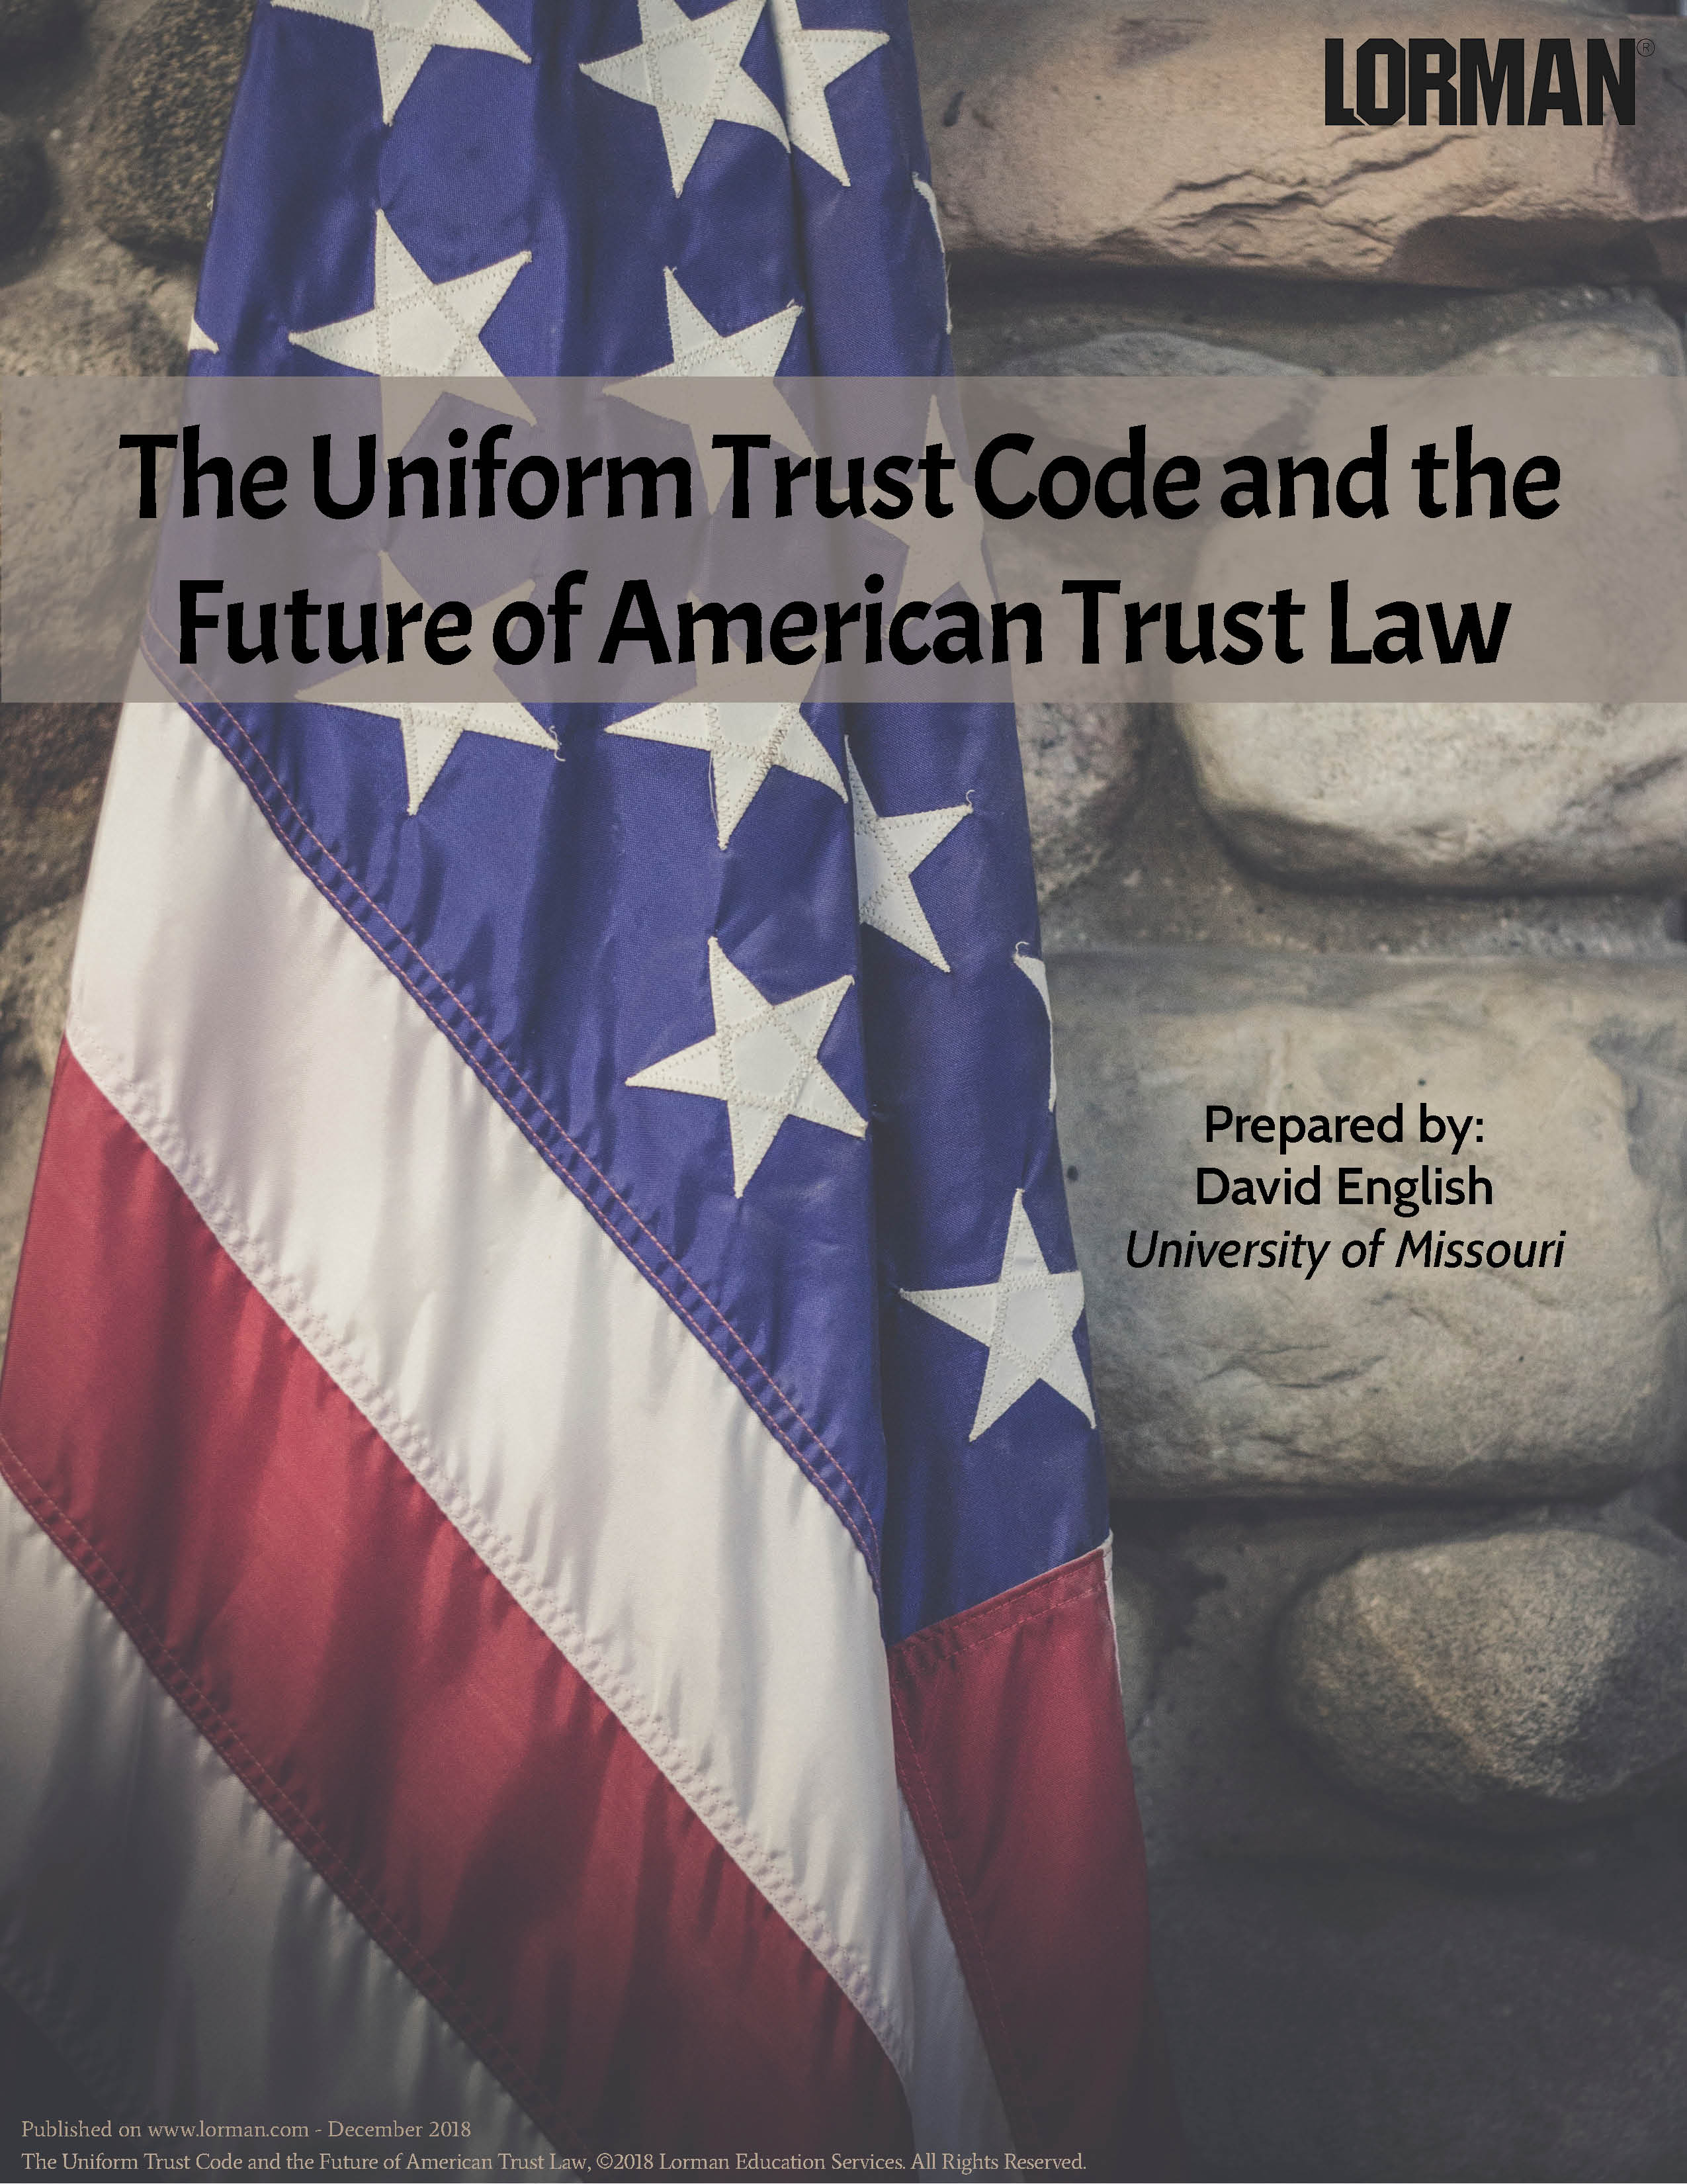 The Uniform Trust Code and the Future of American Trust Law